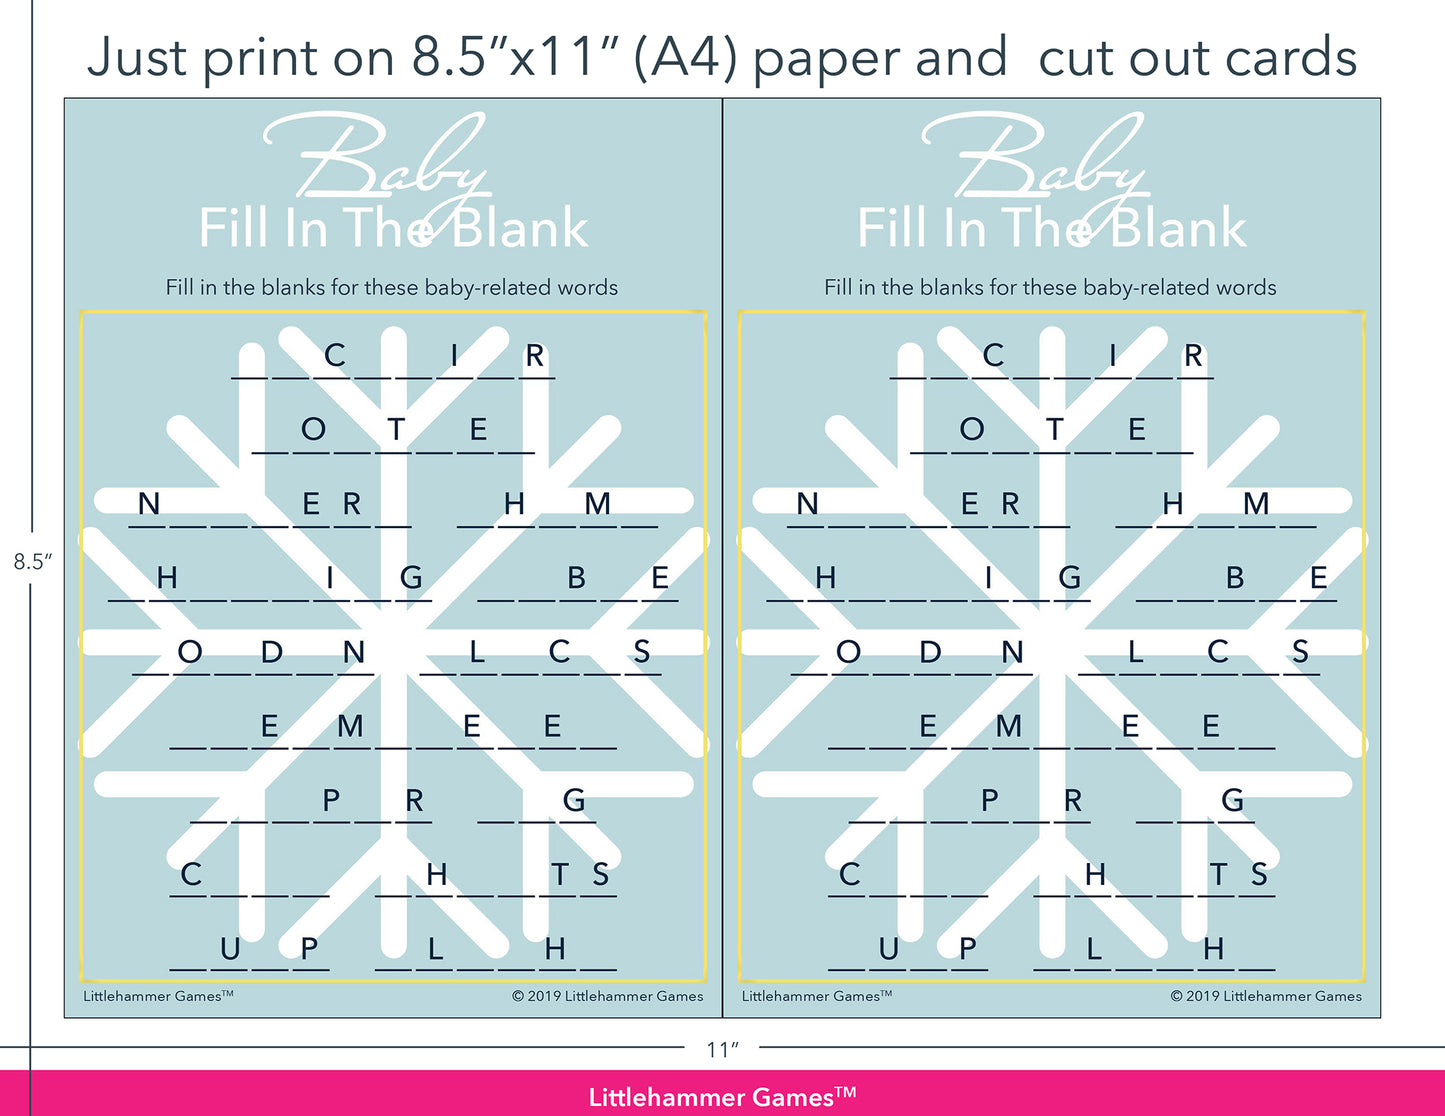 Baby Fill in the Blank snowflake game cards with printing instructions